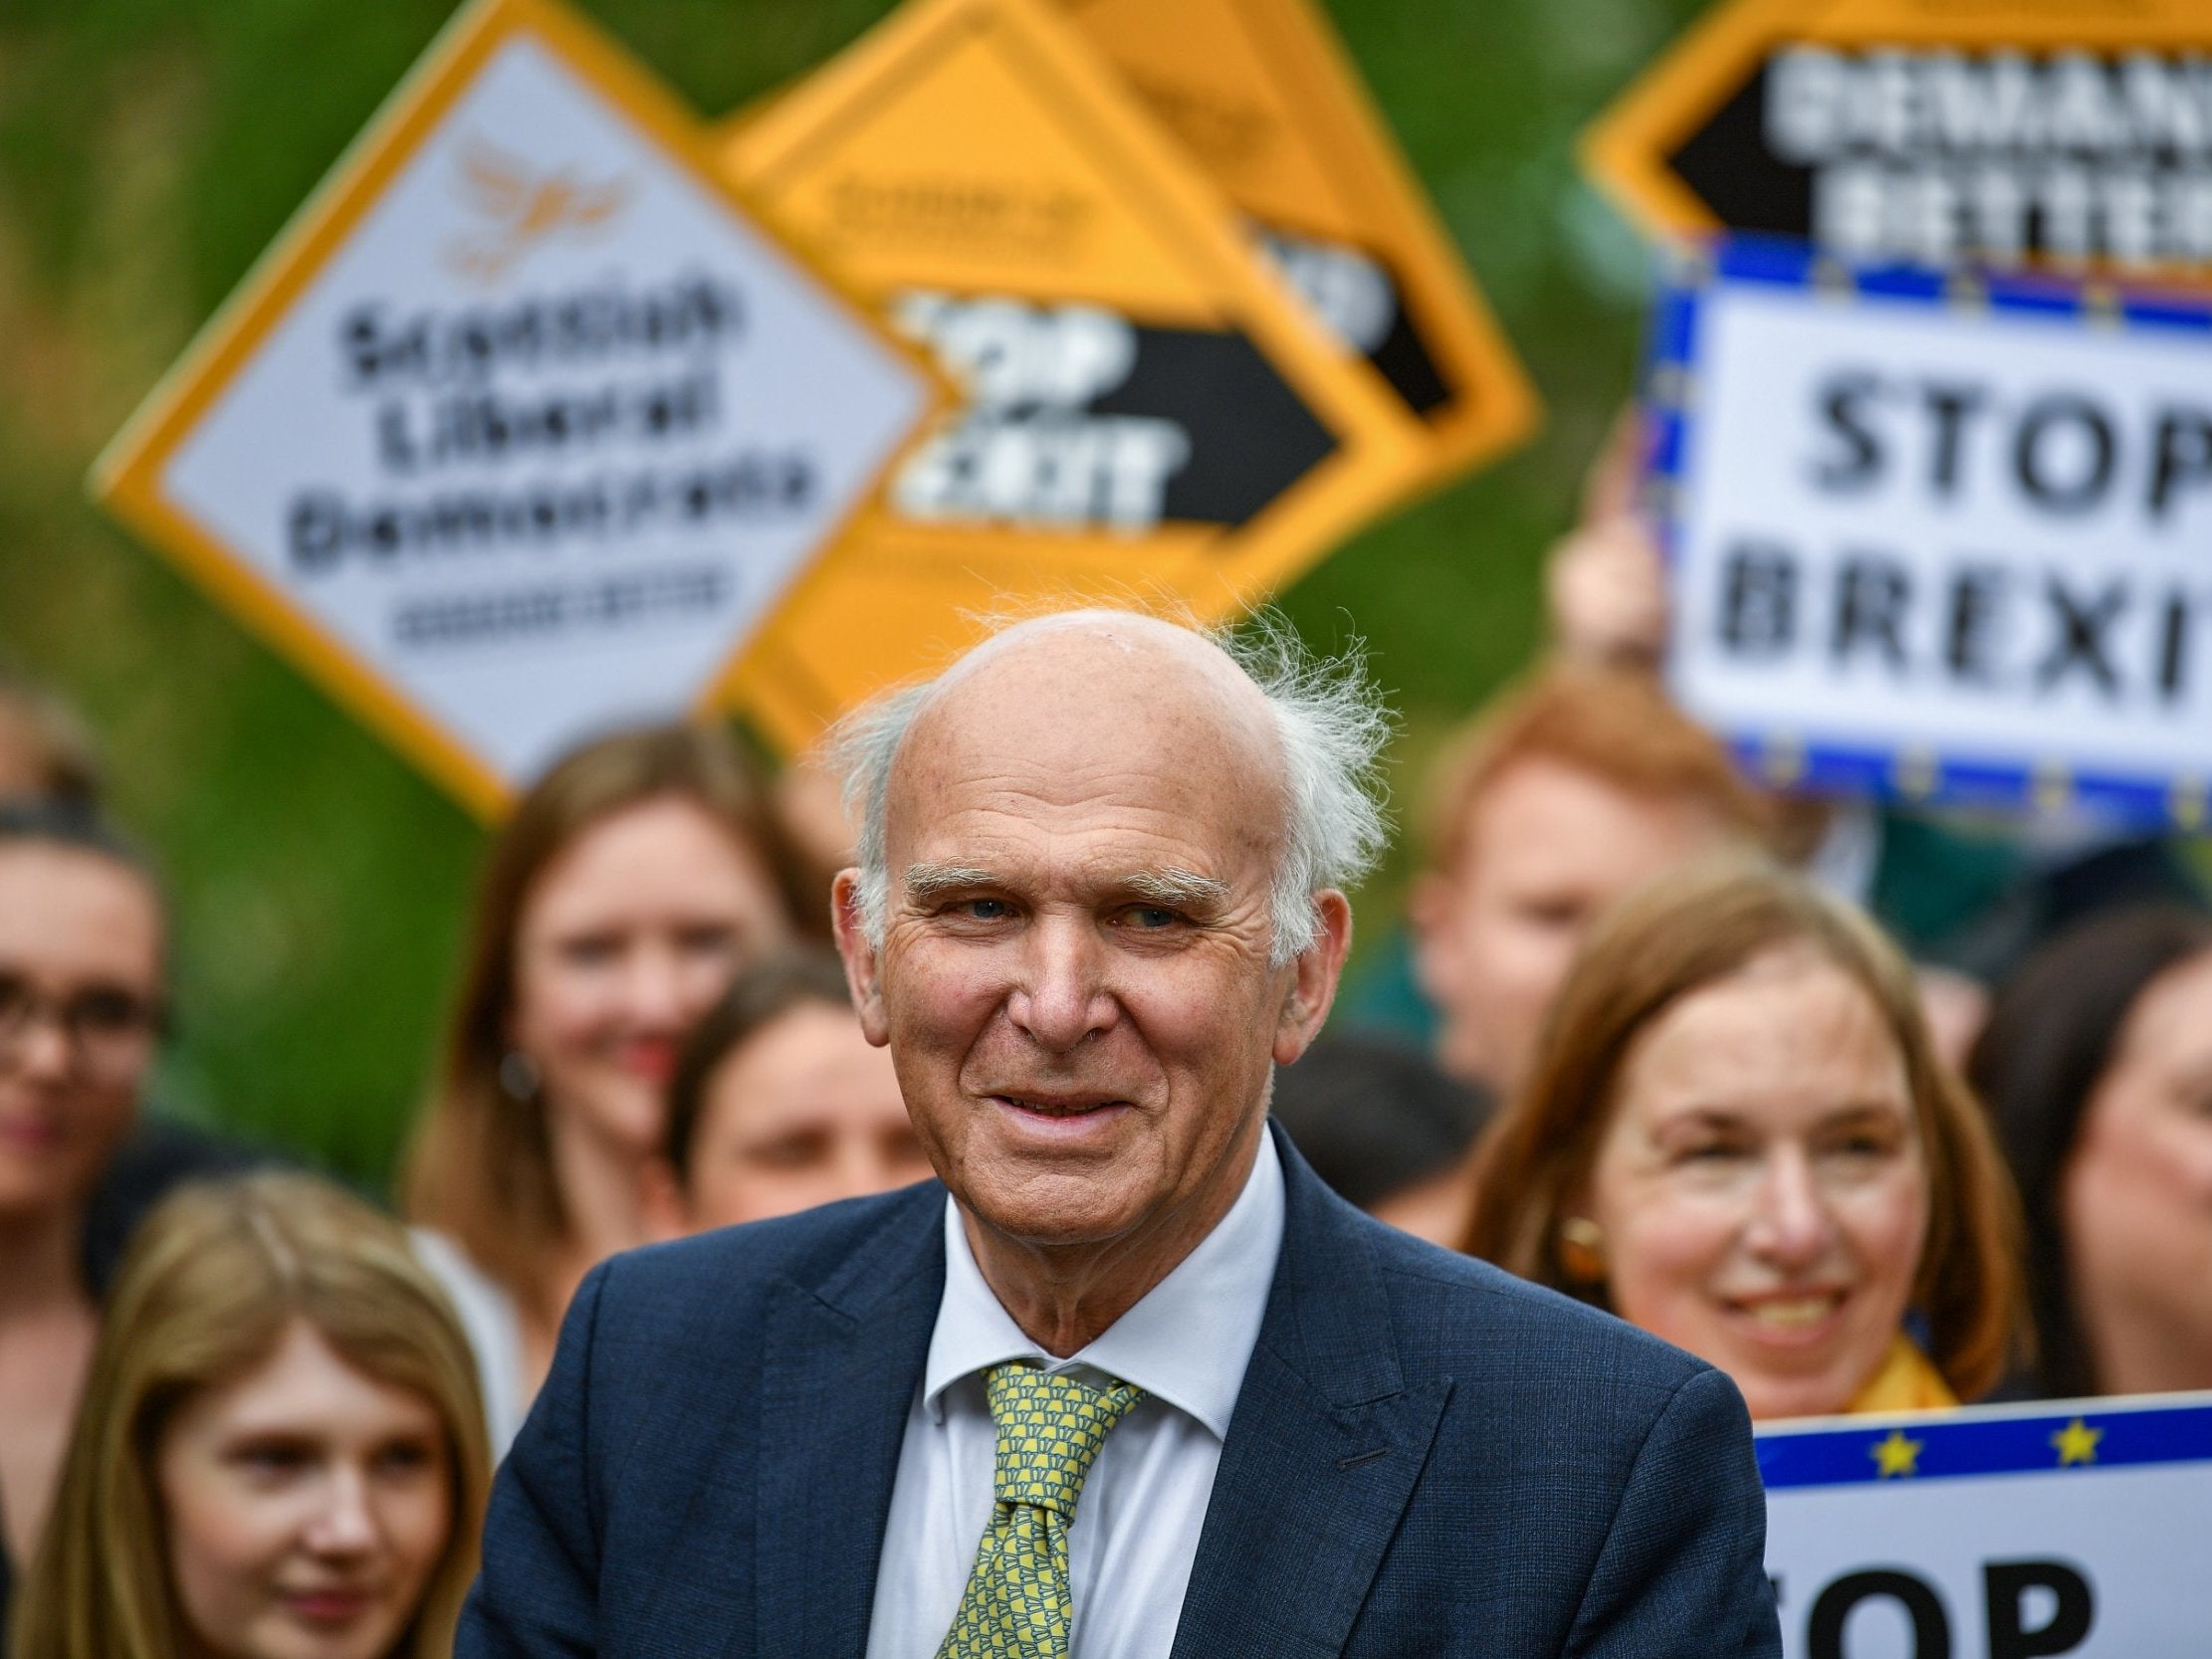 Vince Cable ended his leadership on a high with strong results in local and European elections